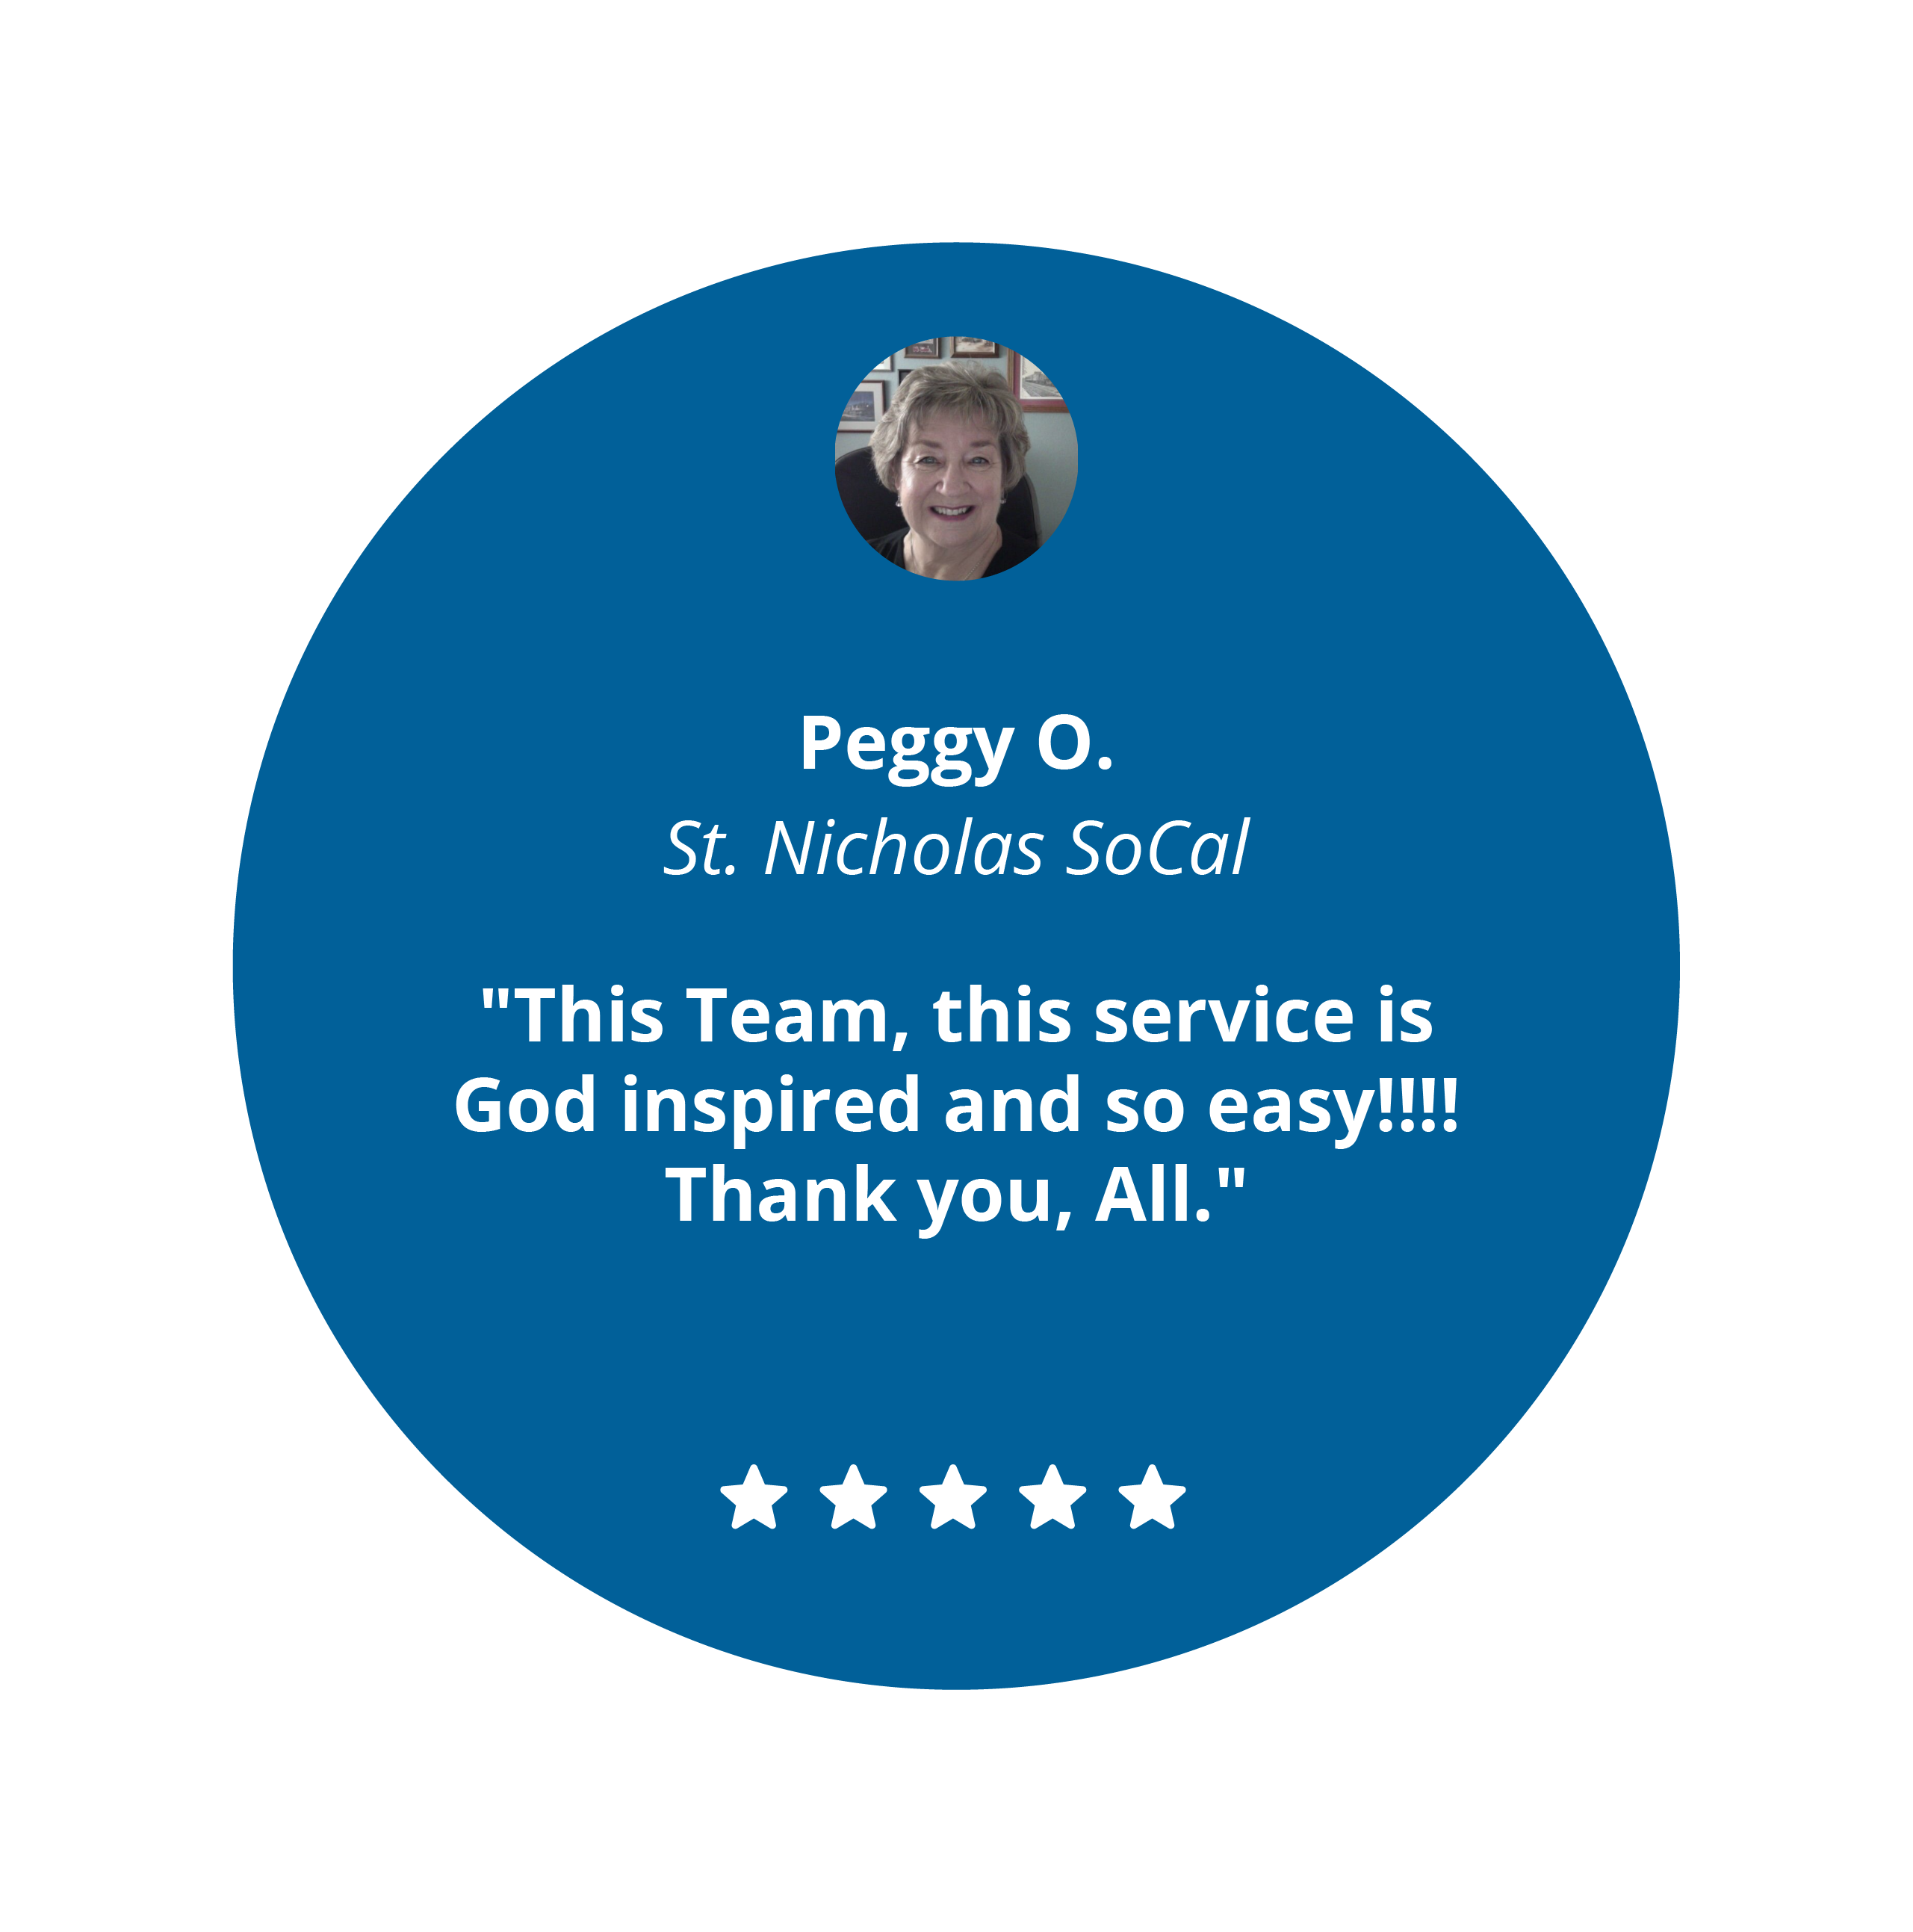 5 star review from Peggy O. from St. Nicholas SoCal,"This Team, this service is God inspired and so easy!!!! Thank you, All."